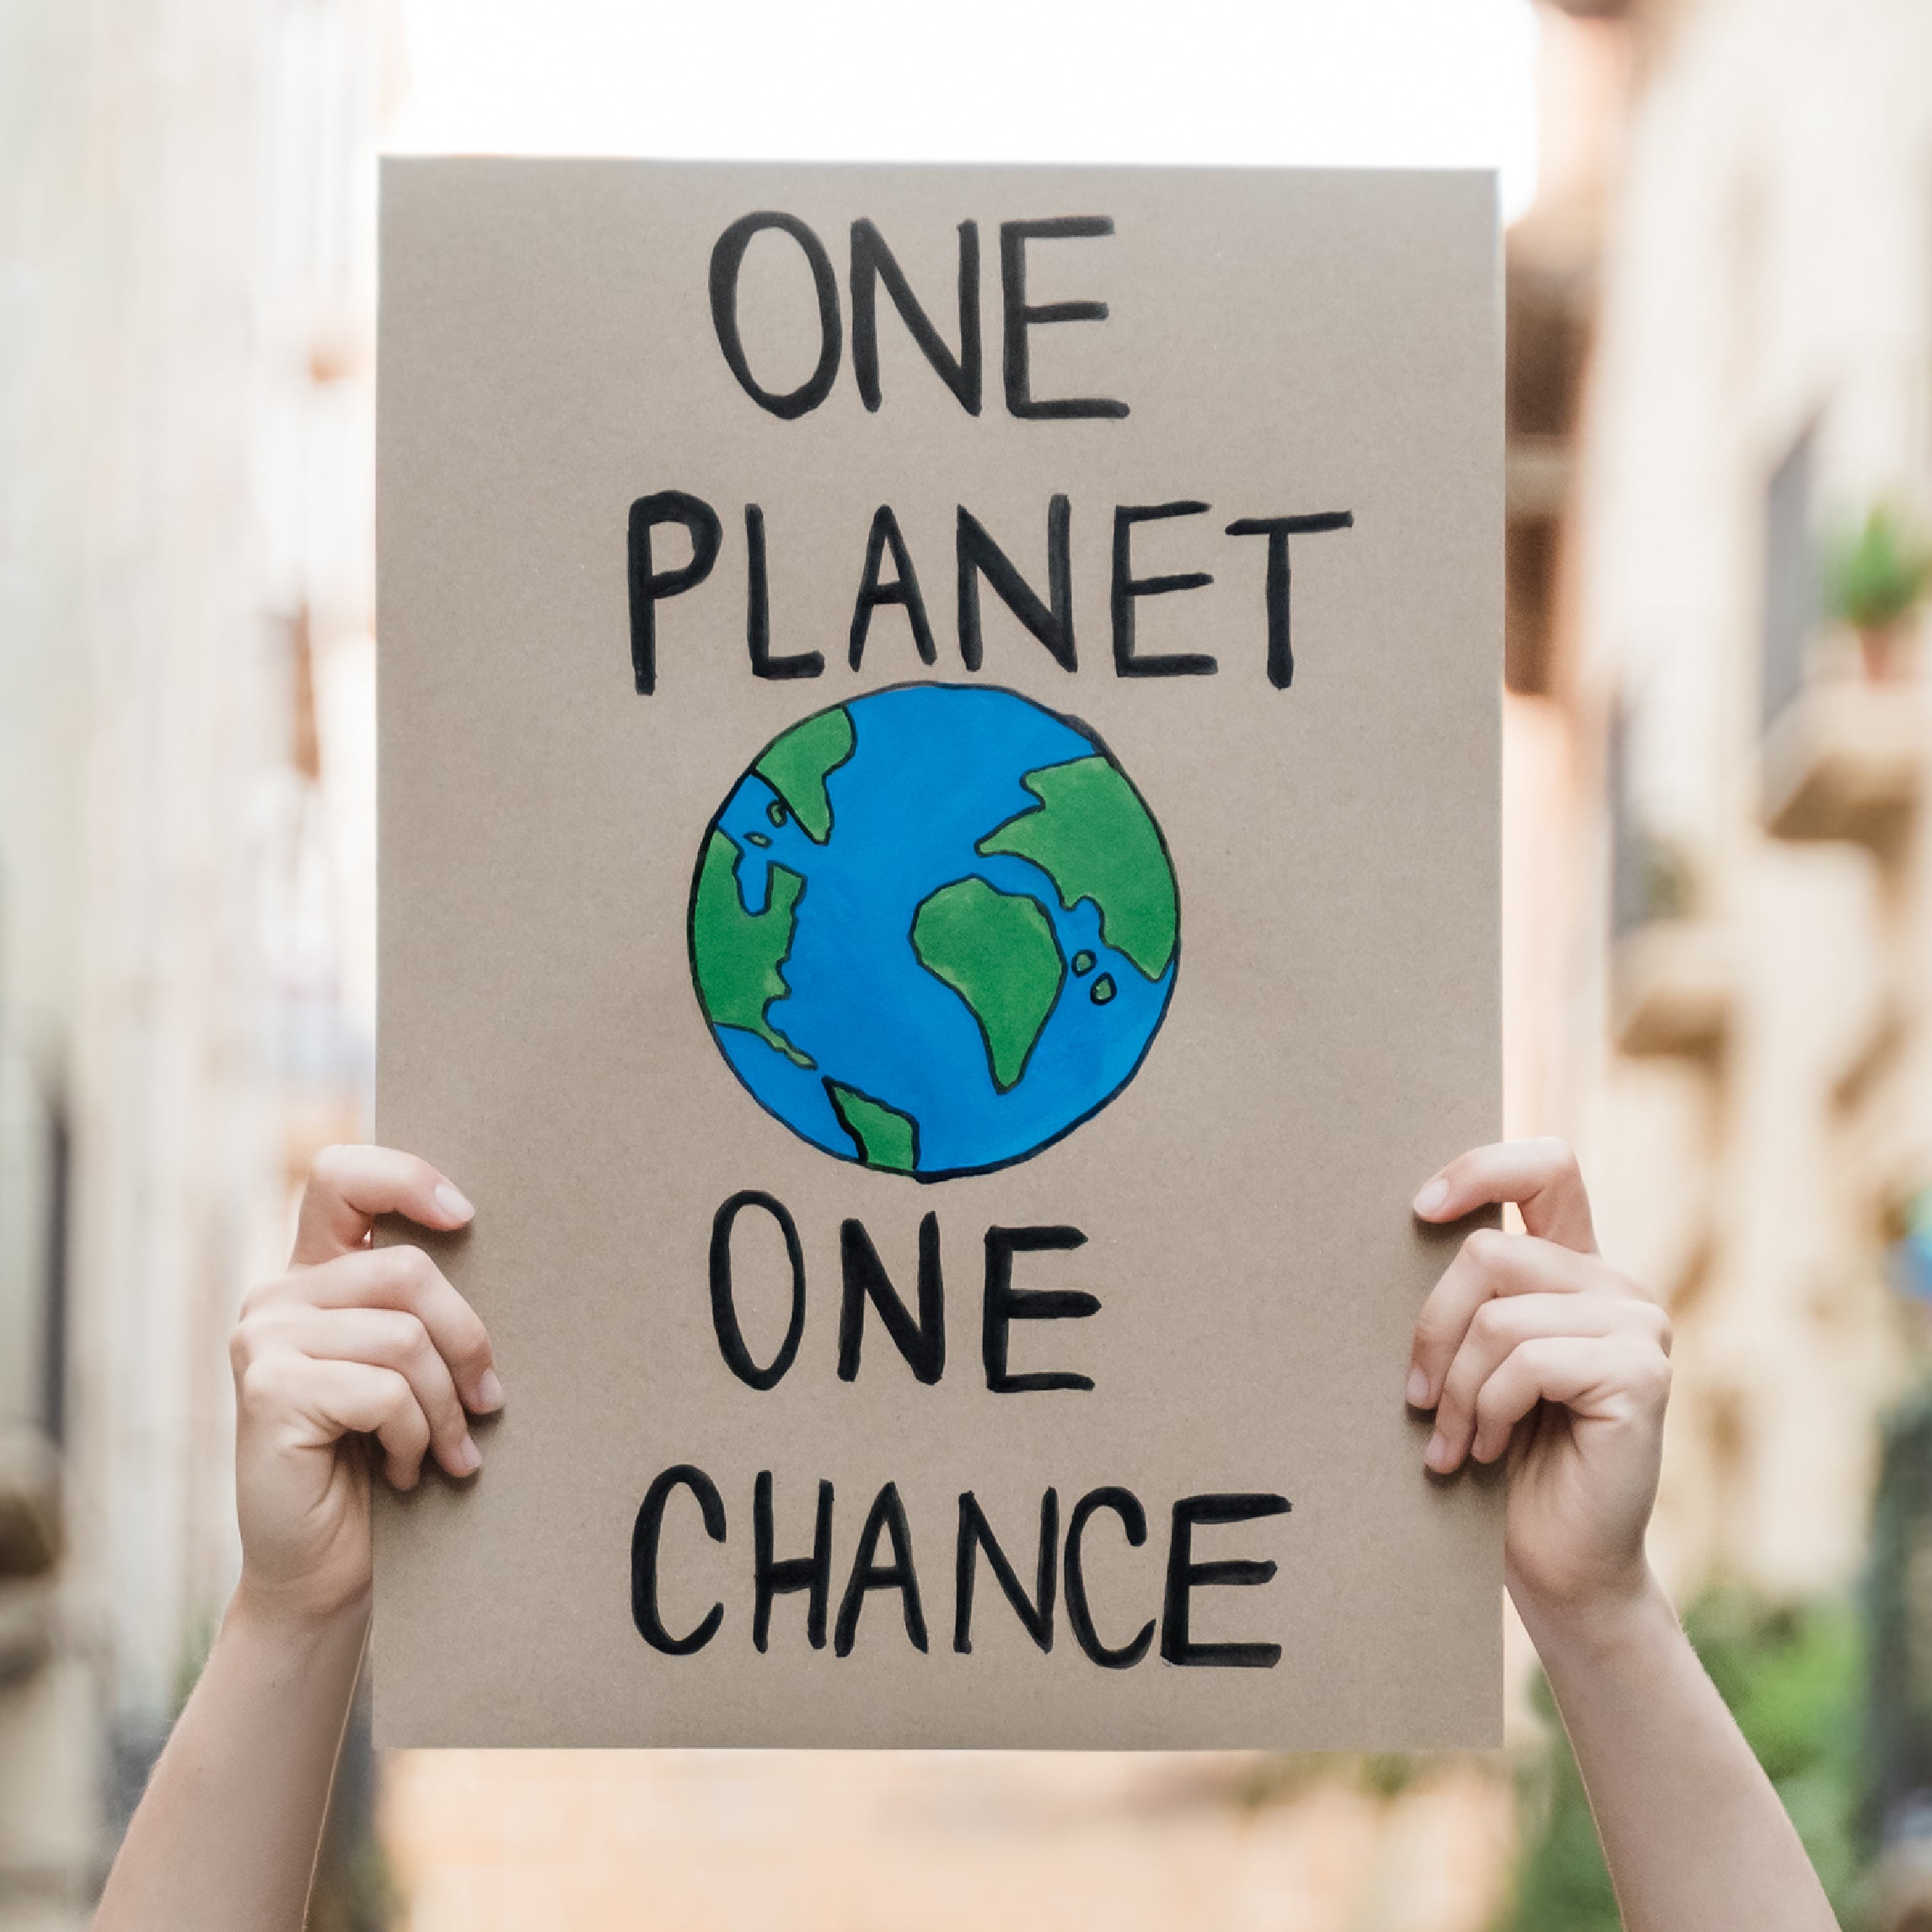 Cardboard sign with globe and "One Planet, One Chance" text